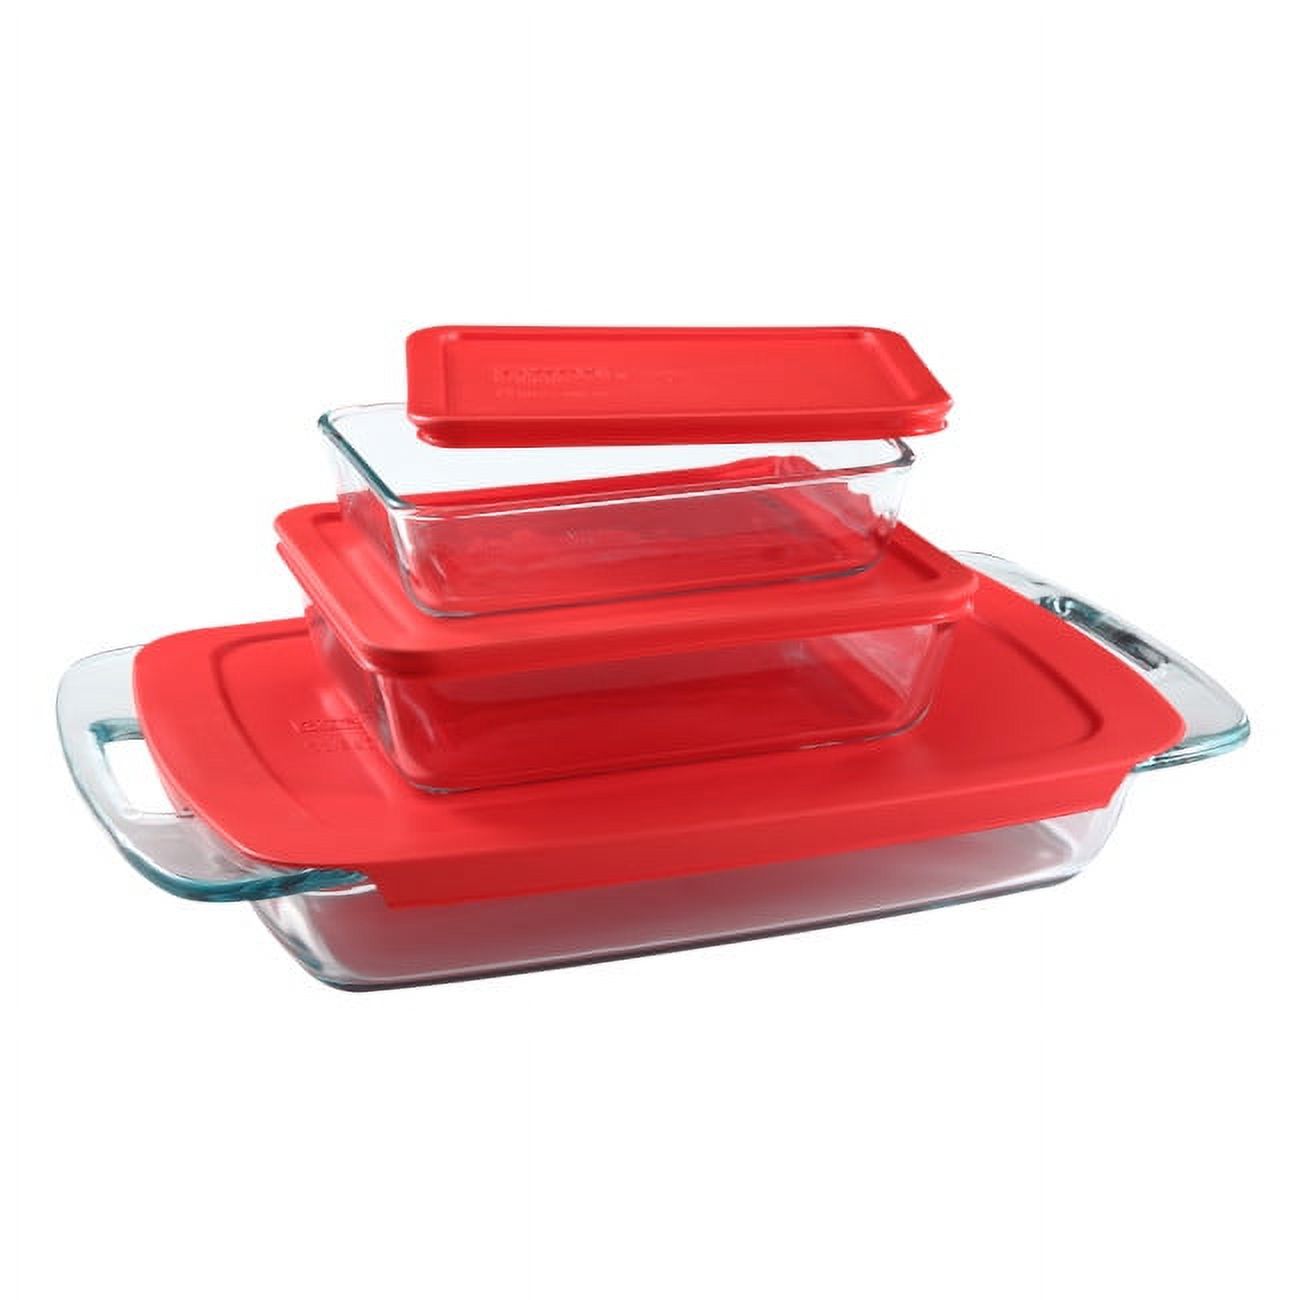 Pyrex Easy Grab Bake & Store Glass Storage Value Pack, 6-Piece - image 1 of 9